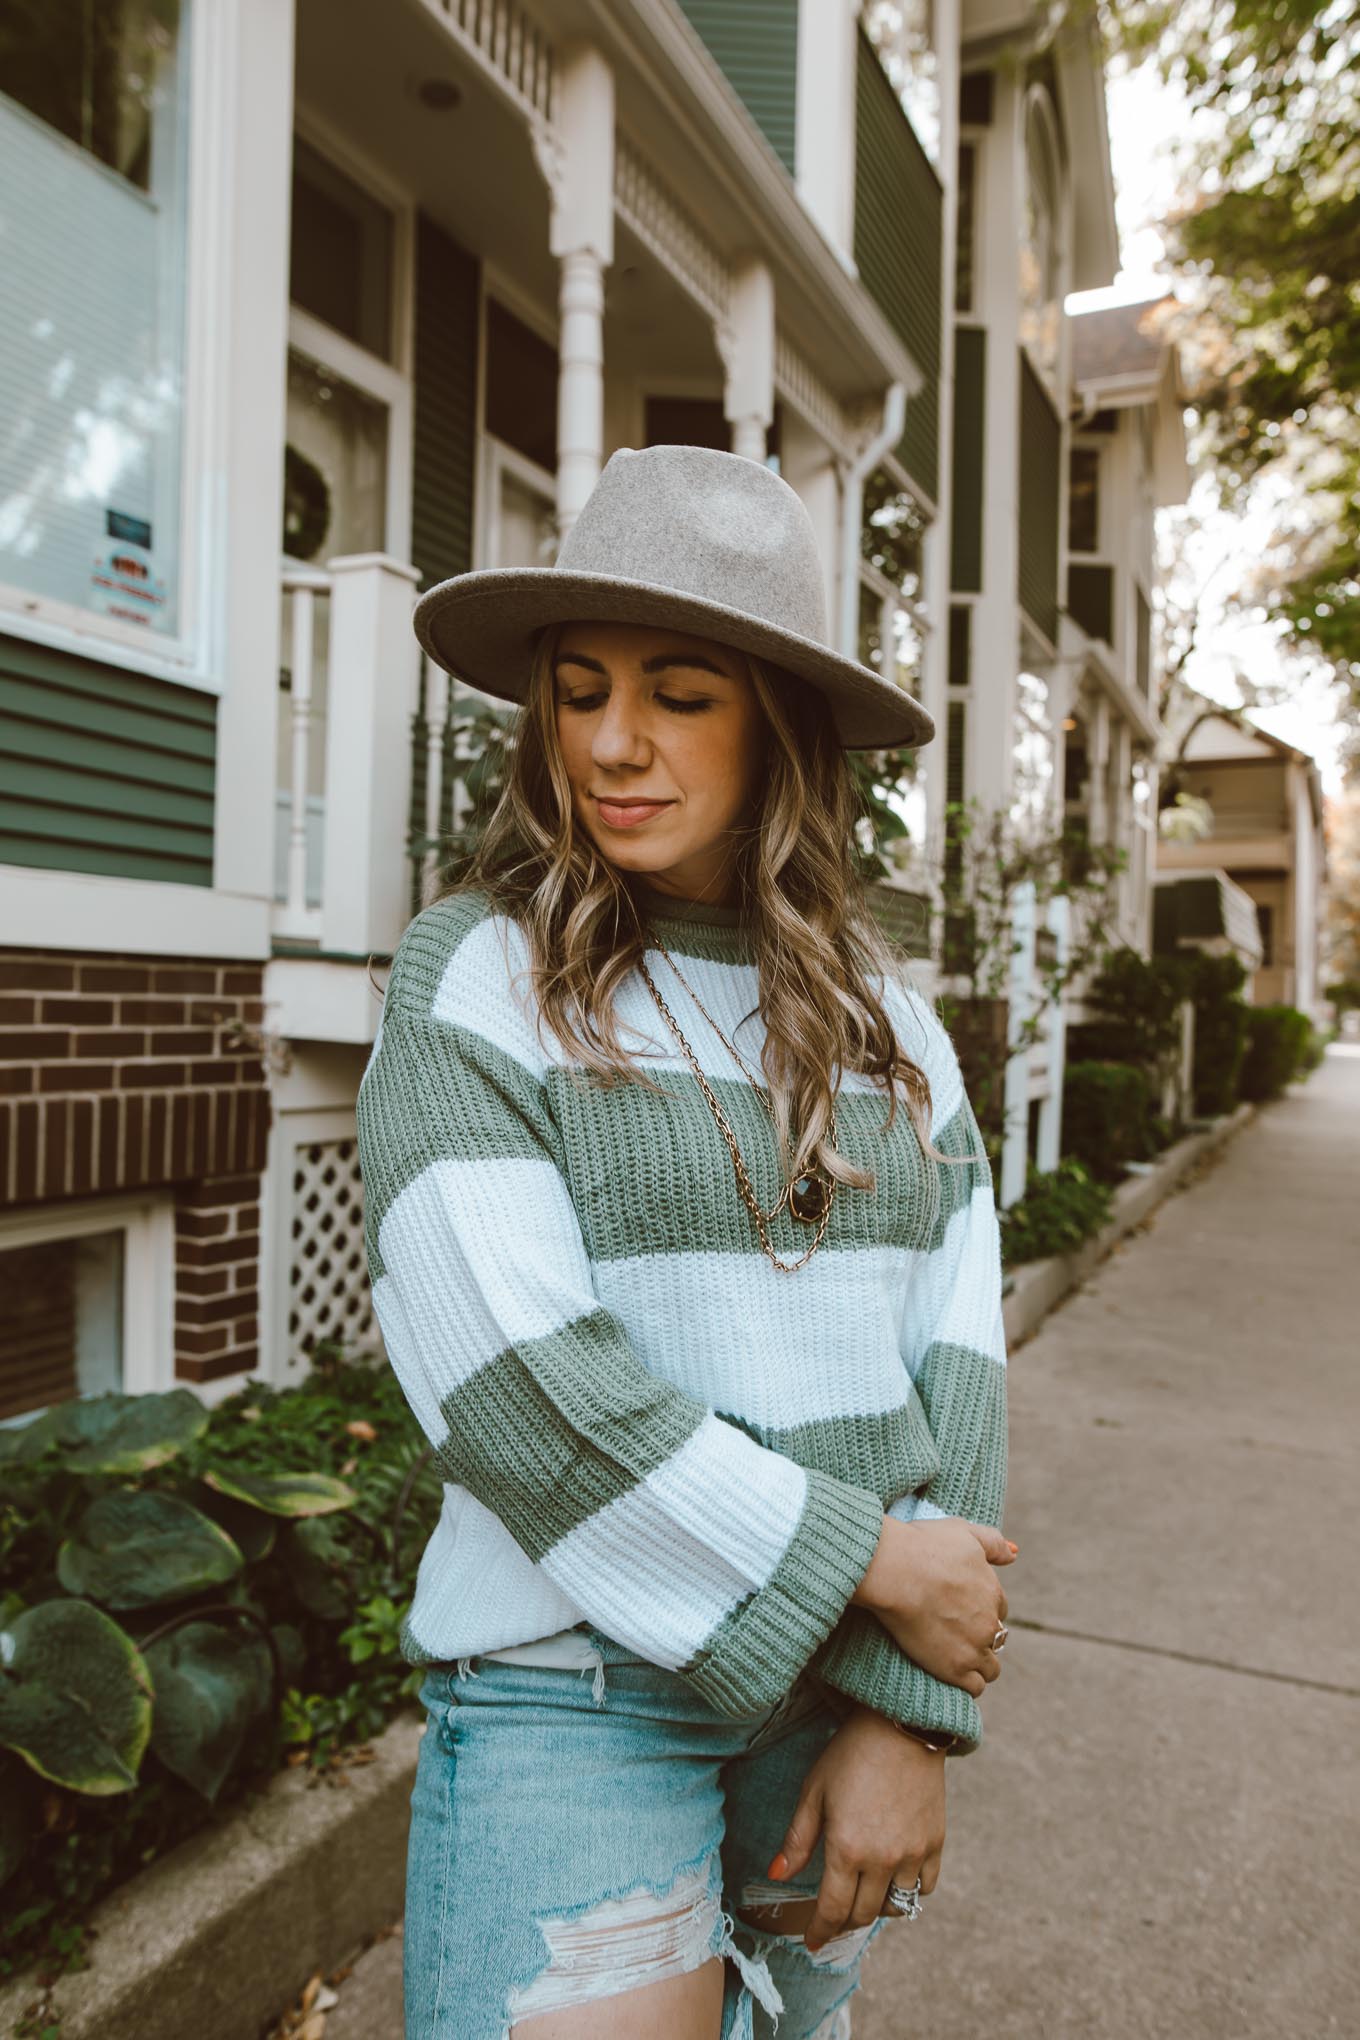 Fall Hat by popular Chicago fashion blog, Glass of Glam: image of a woman outside wearing a Amazon ZESICA Women's Long Sleeve Crew Neck Striped Color Block Comfy Loose Oversized Knitted Pullover Sweater, American Eagle Mom Jean, Nordstrom Vans sneakers, Amazon Lisianthus Women Belt Buckle Wool Wide Brim Fedora Hat, and Kendra Scott Davis Vintage Gold Multi Strand Necklace In Golden Obsidian.